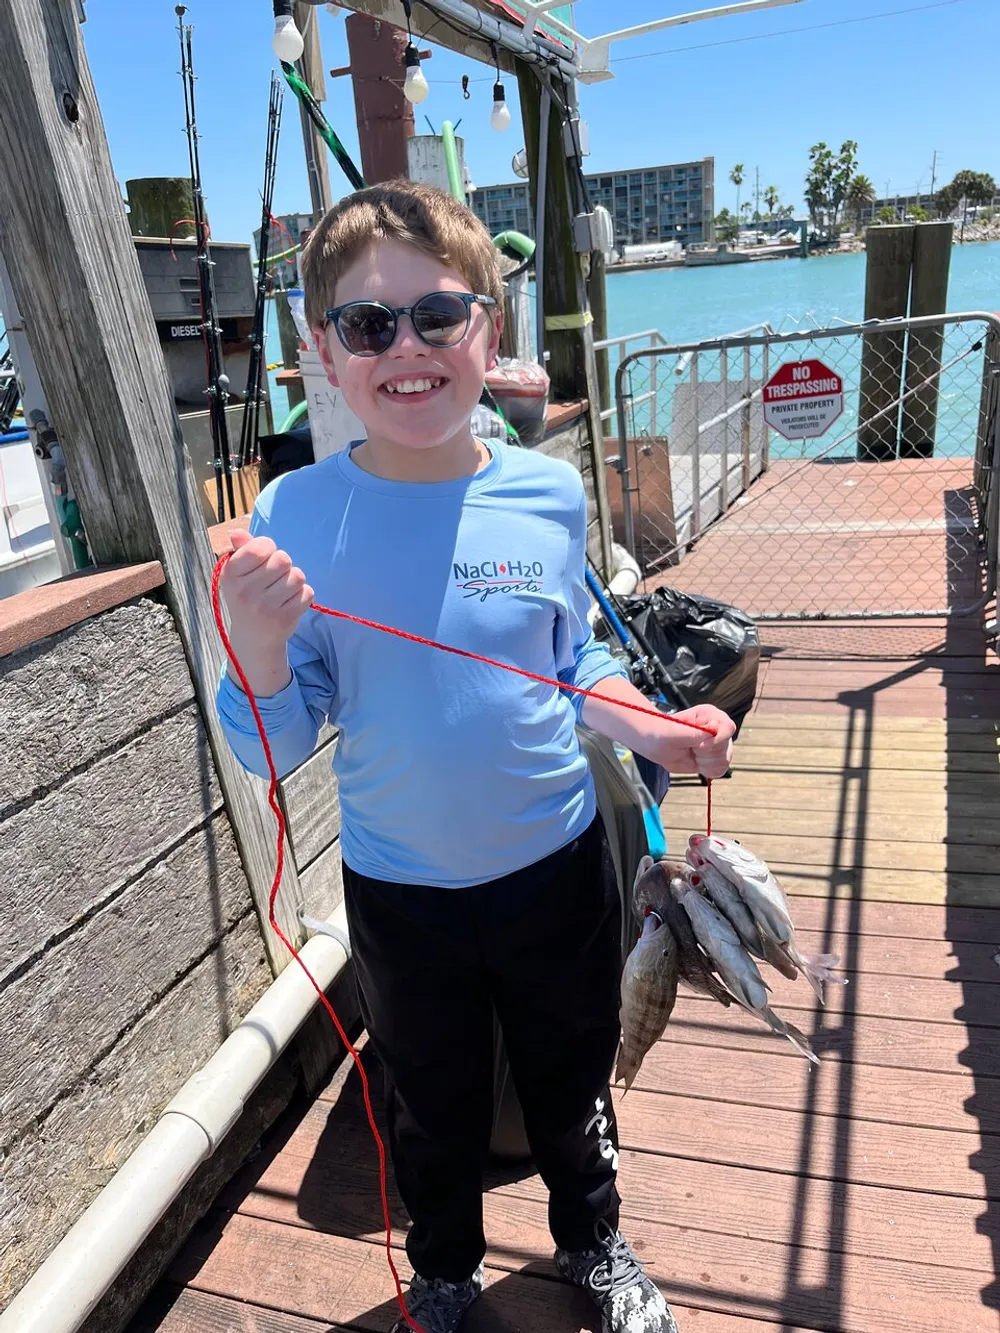 A smiling young boy wearing sunglasses is proudly holding up a string of fish possibly showcasing his catch from a day of fishing at a dock